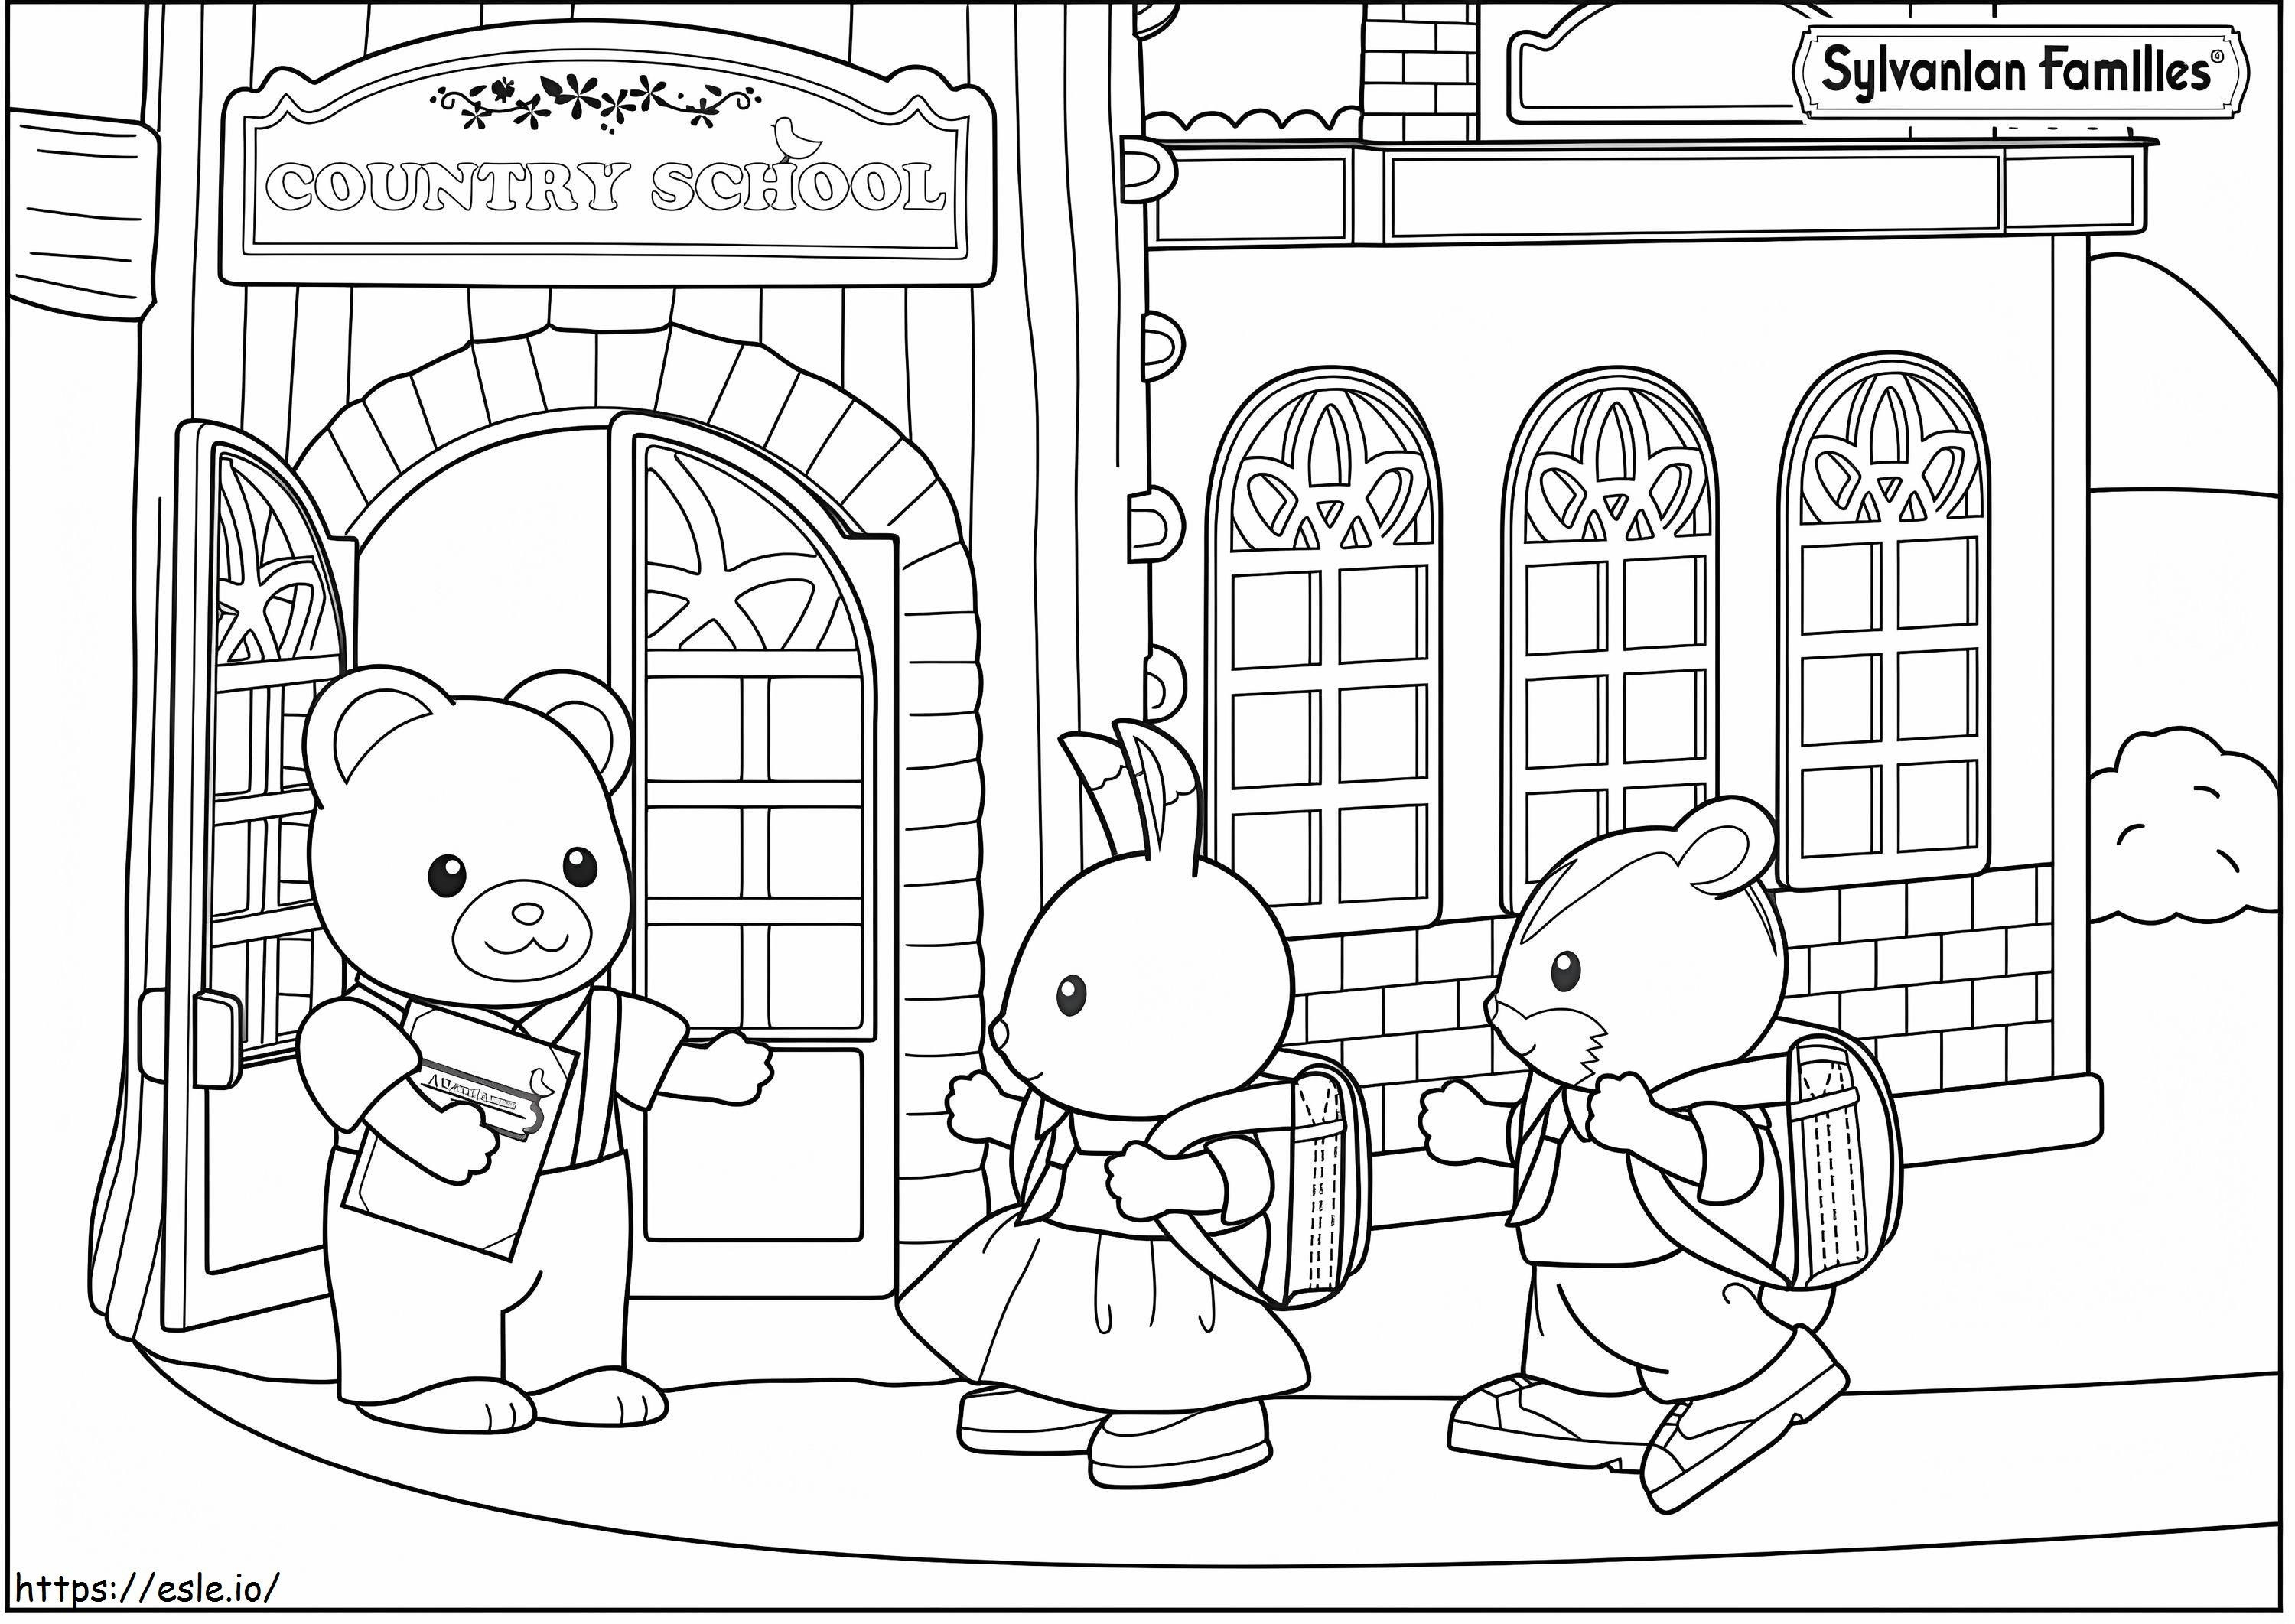 Sylvanian Families 19 coloring page